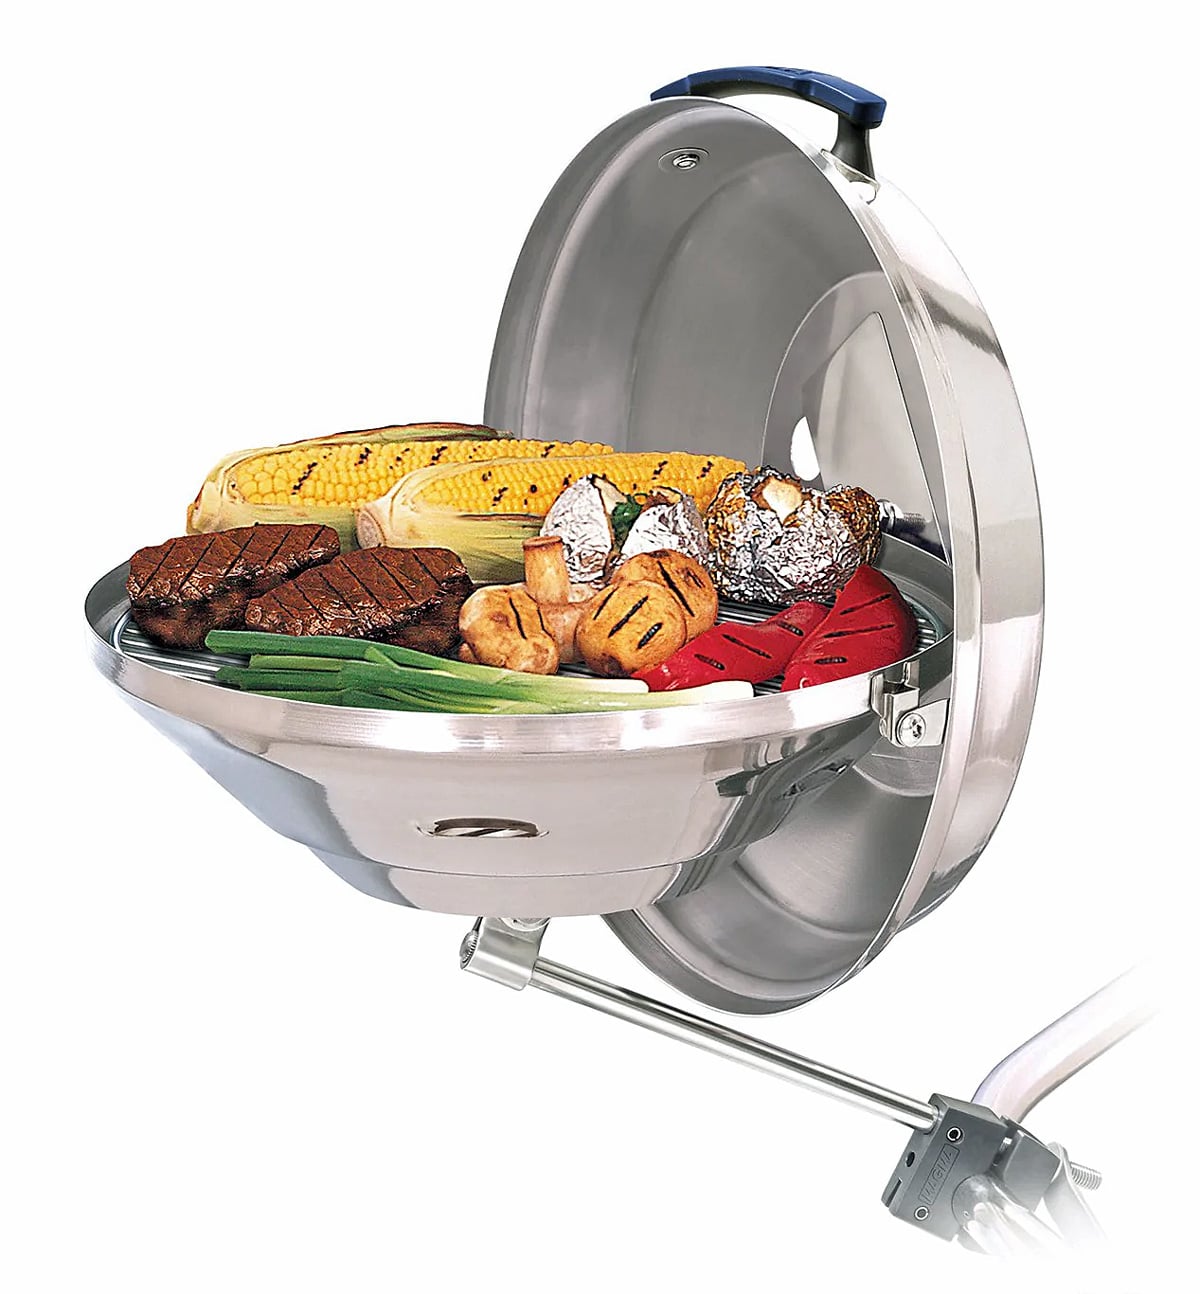 Party Size Marine Gas Grill Reviewed